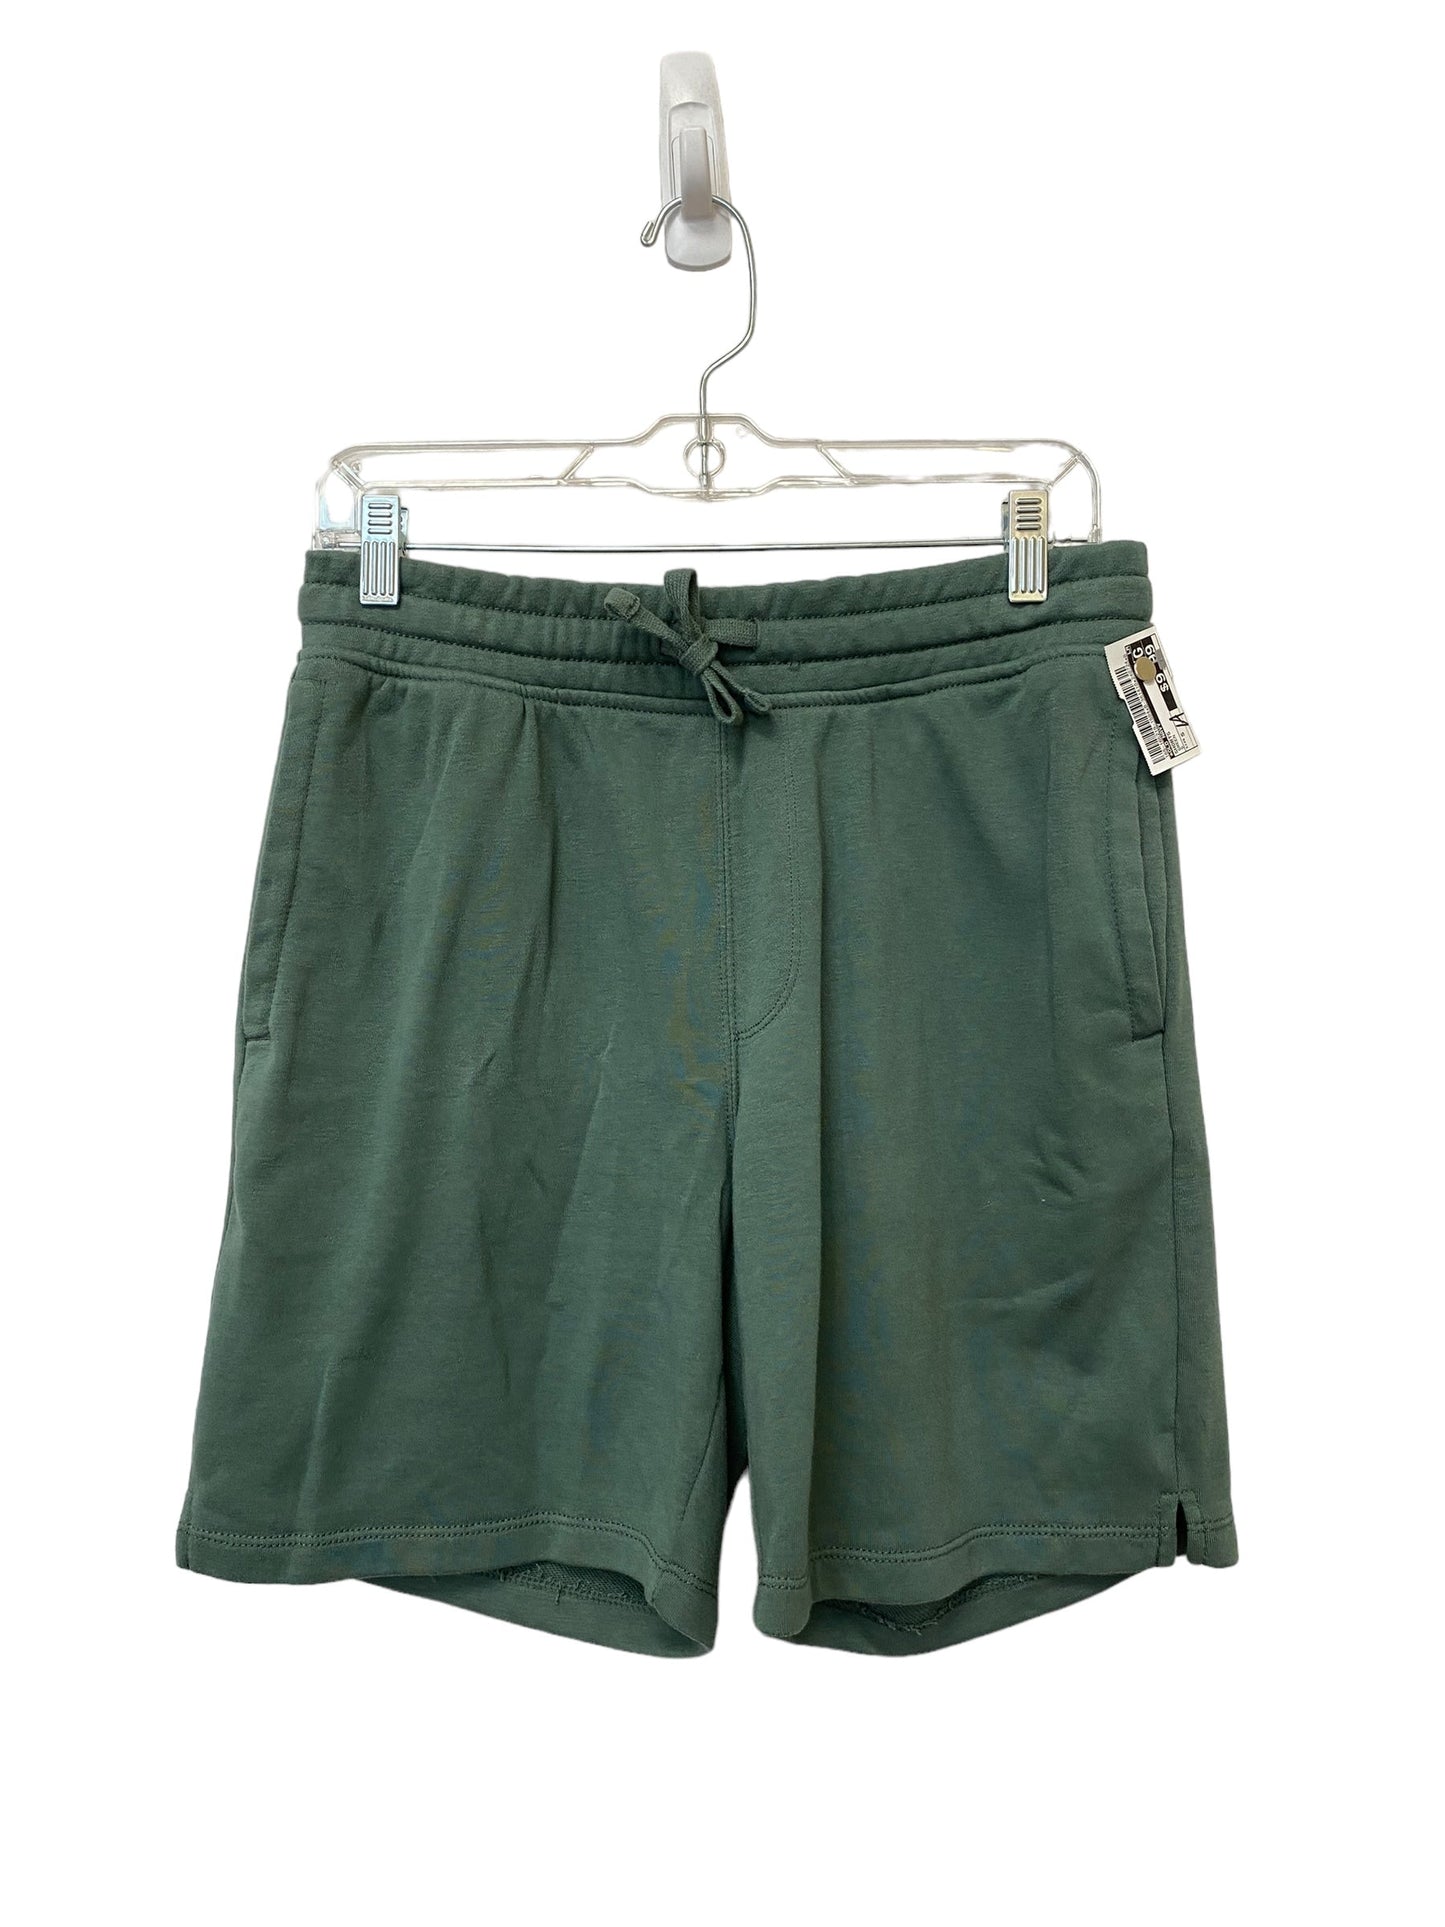 Green Shorts Old Navy, Size S